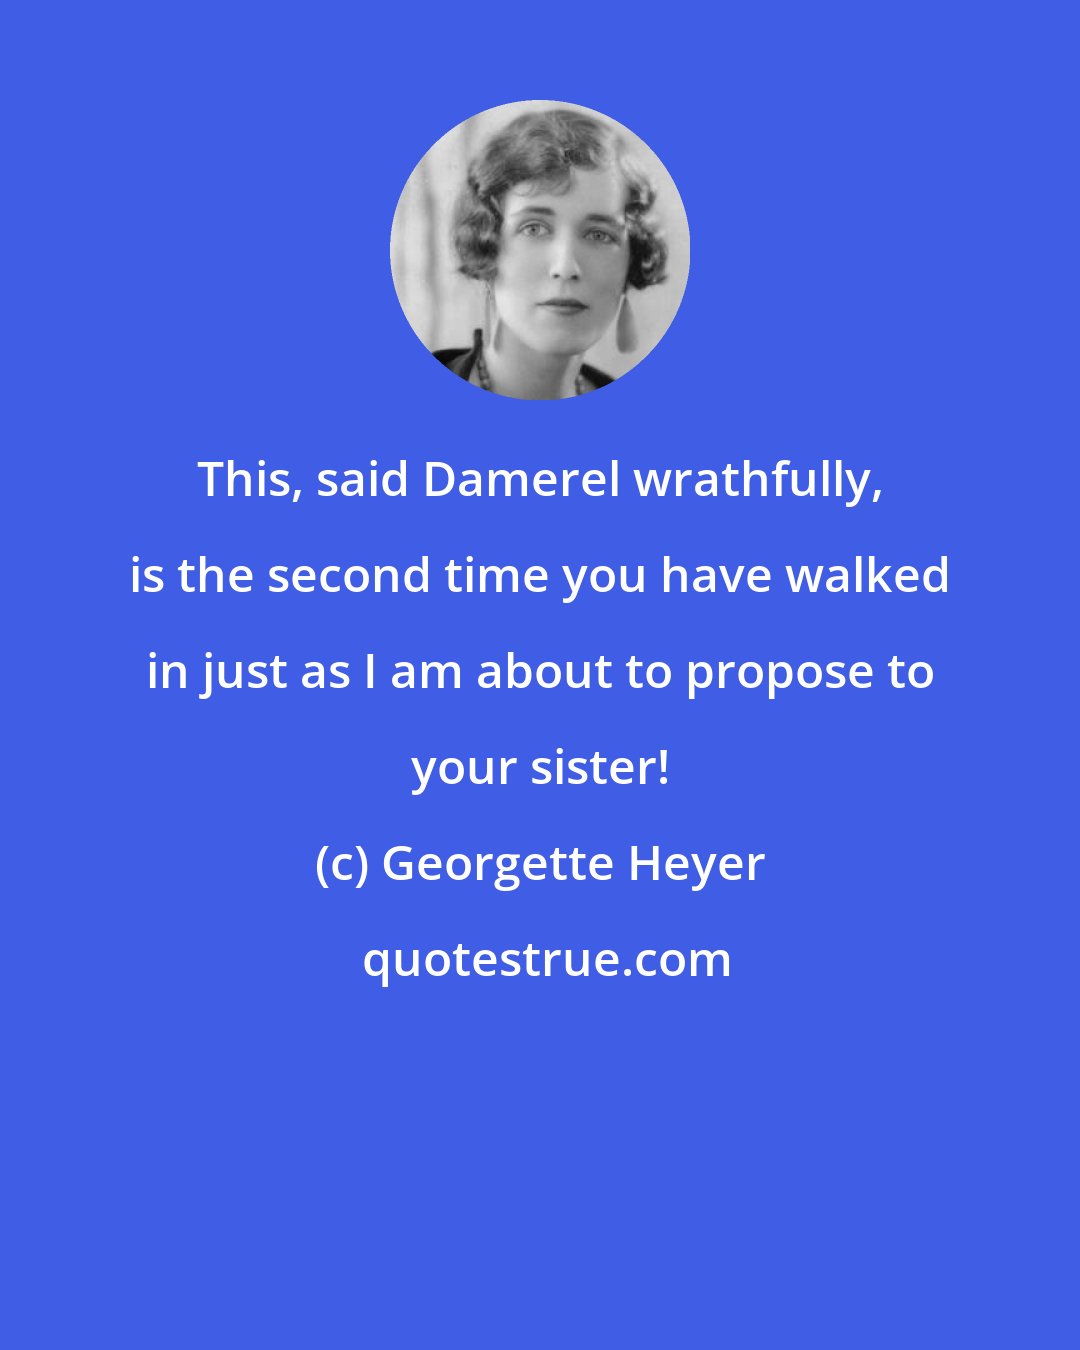 Georgette Heyer: This, said Damerel wrathfully, is the second time you have walked in just as I am about to propose to your sister!